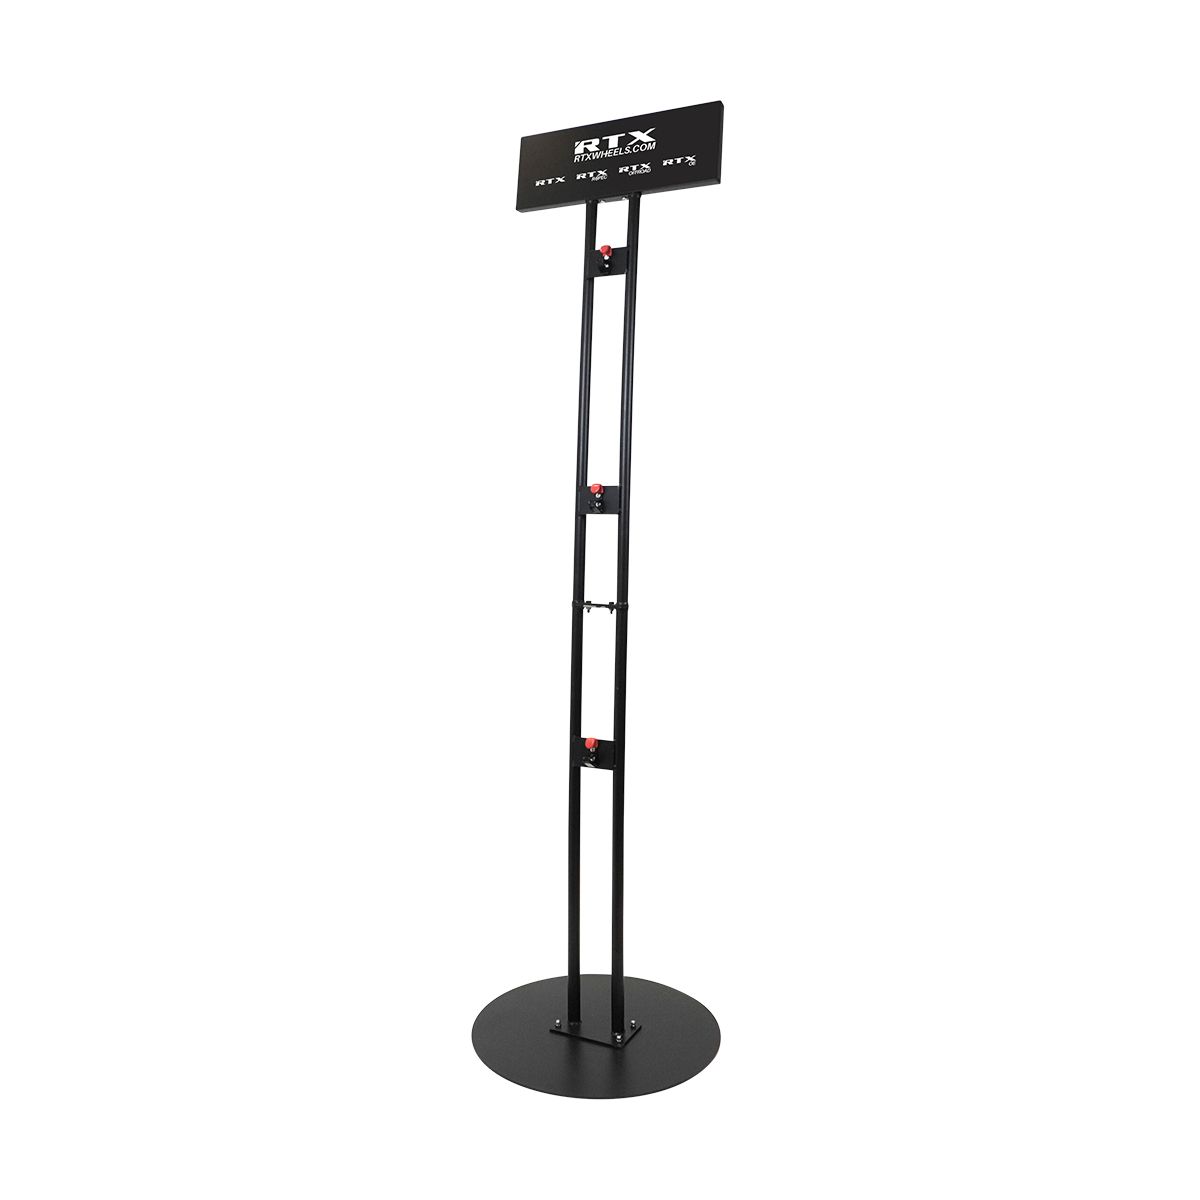 RTX C80 - Black Display Stand for 3 Wheels (14" to 20") with RTX Logo